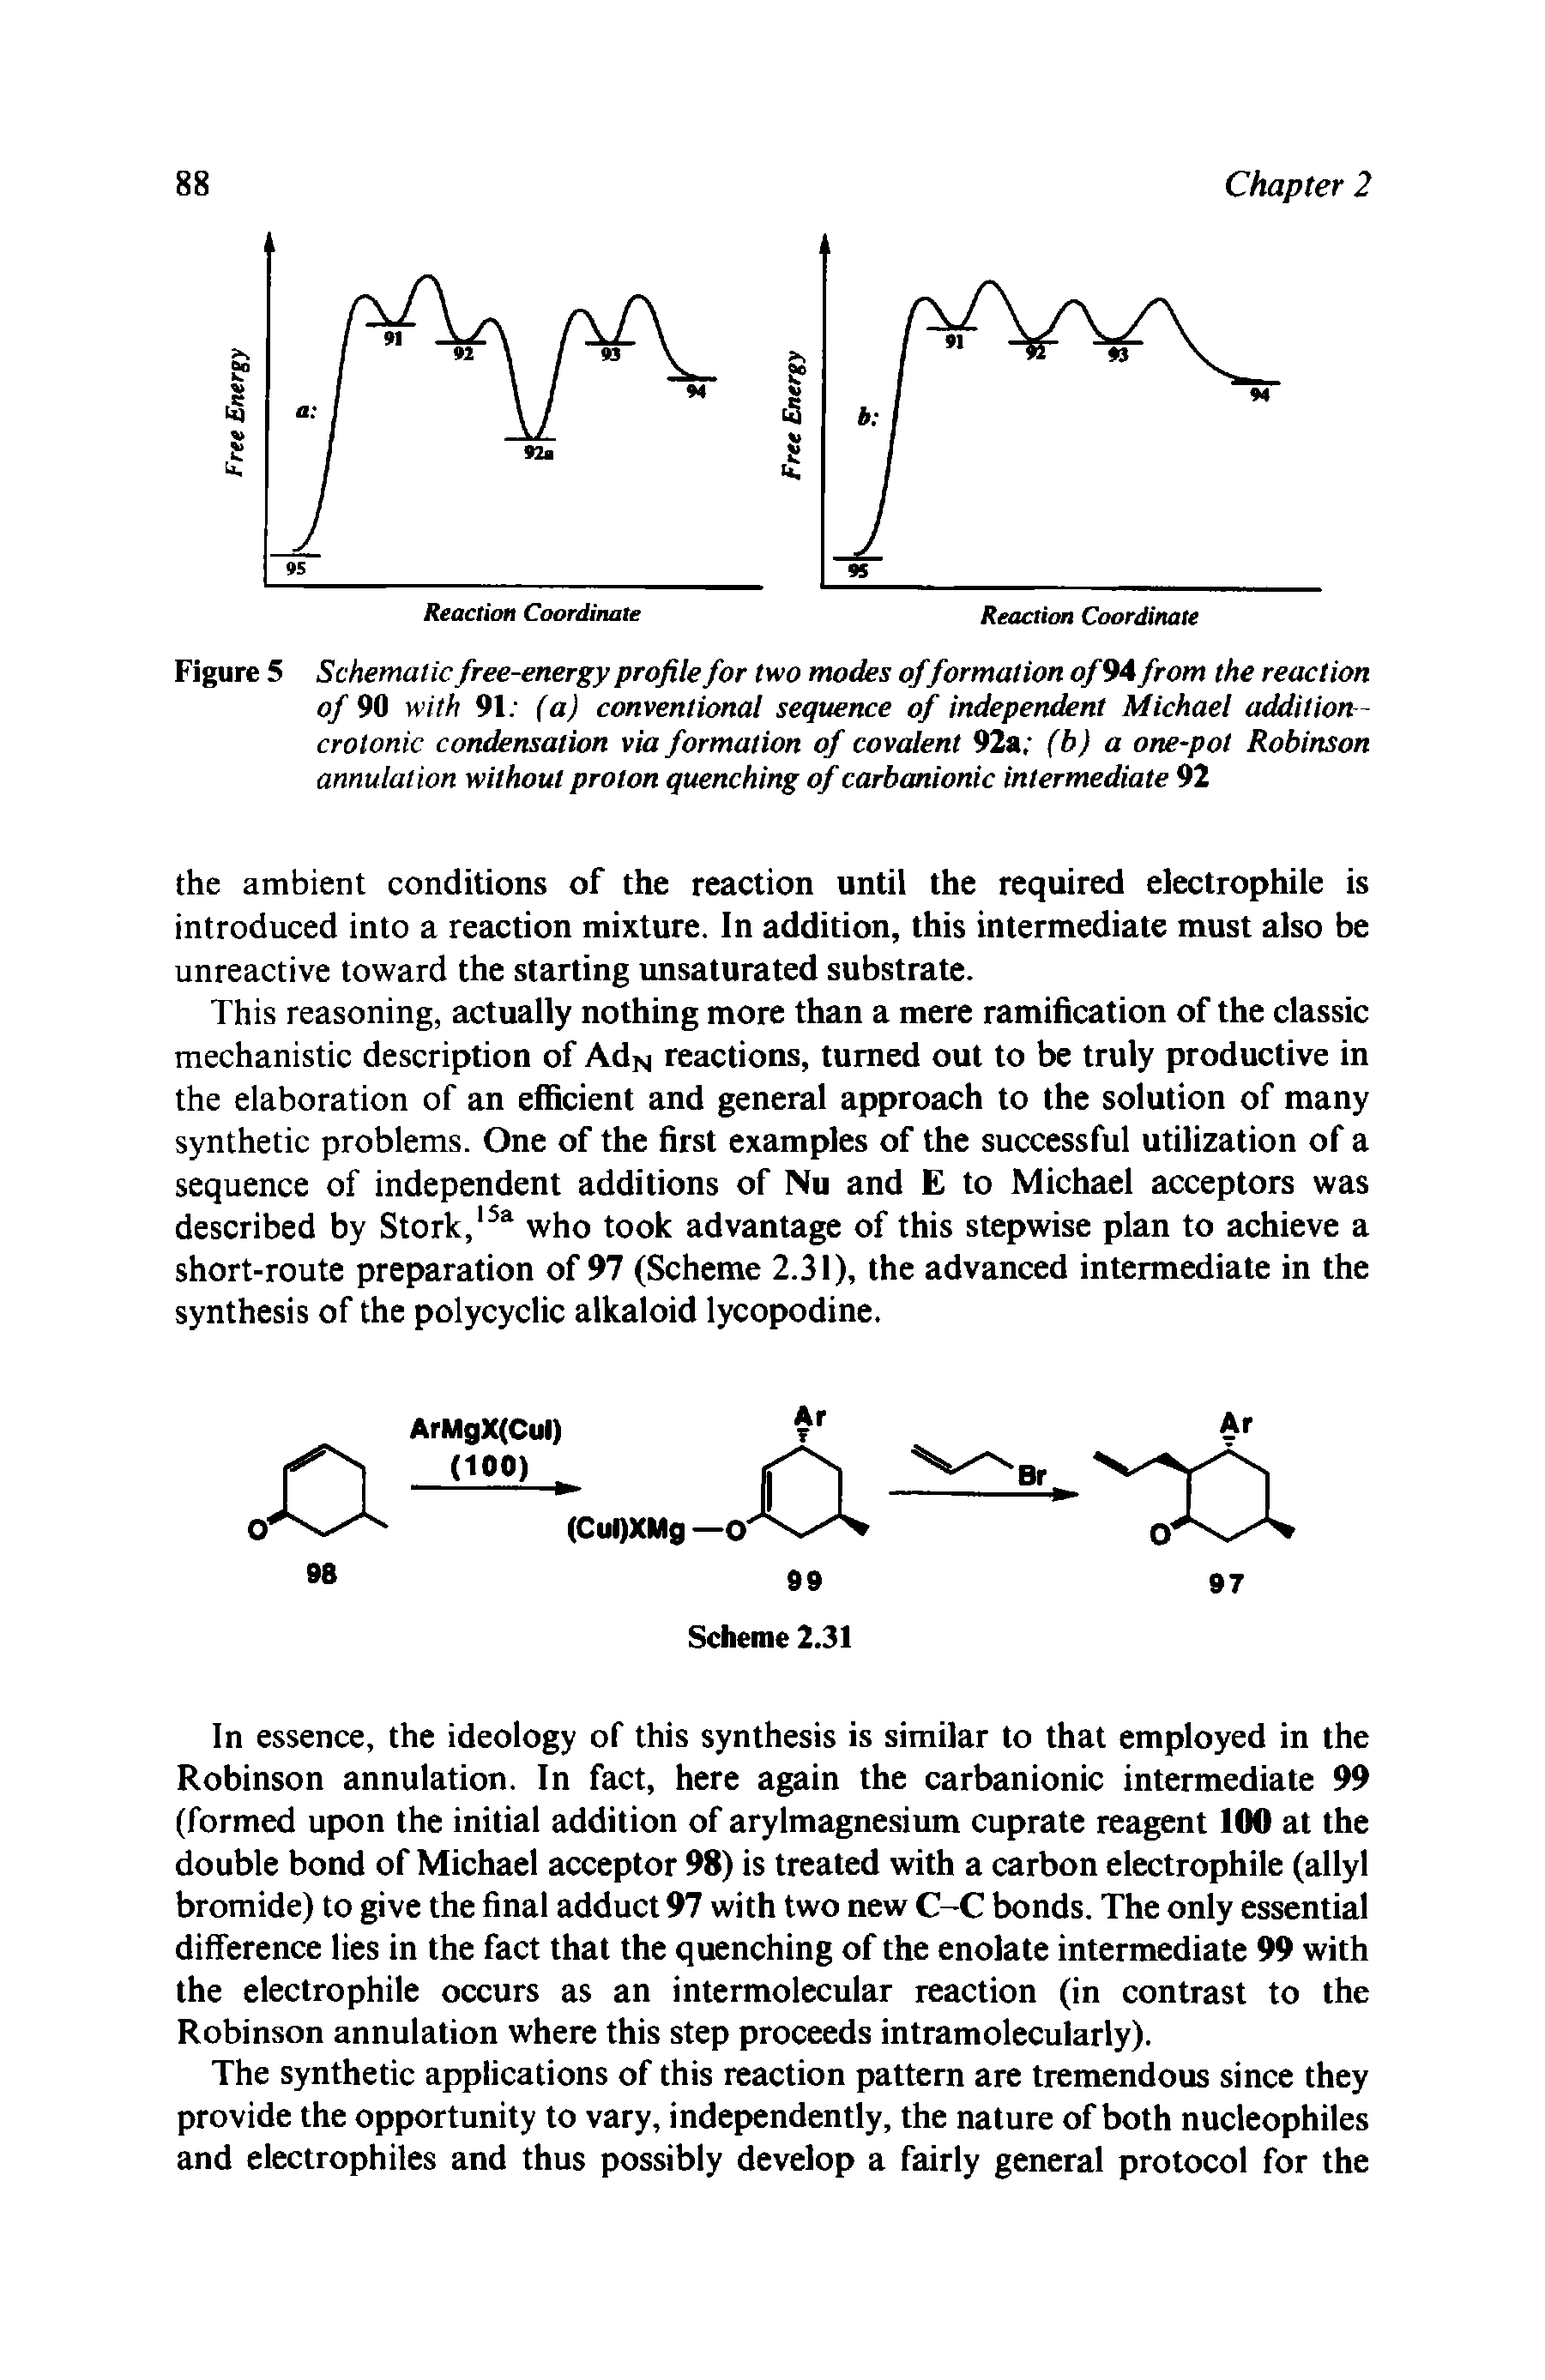 Figure 5 Schematic free-energy profile for two modes offormation of 94 from the reaction of 90 with 91 (a) conventional sequence of independent Michael addition-crotonic condensation via formation of covalent 92a (b) a one-pot Robinson annulation without proton quenching of carbanionic intermediate 92...